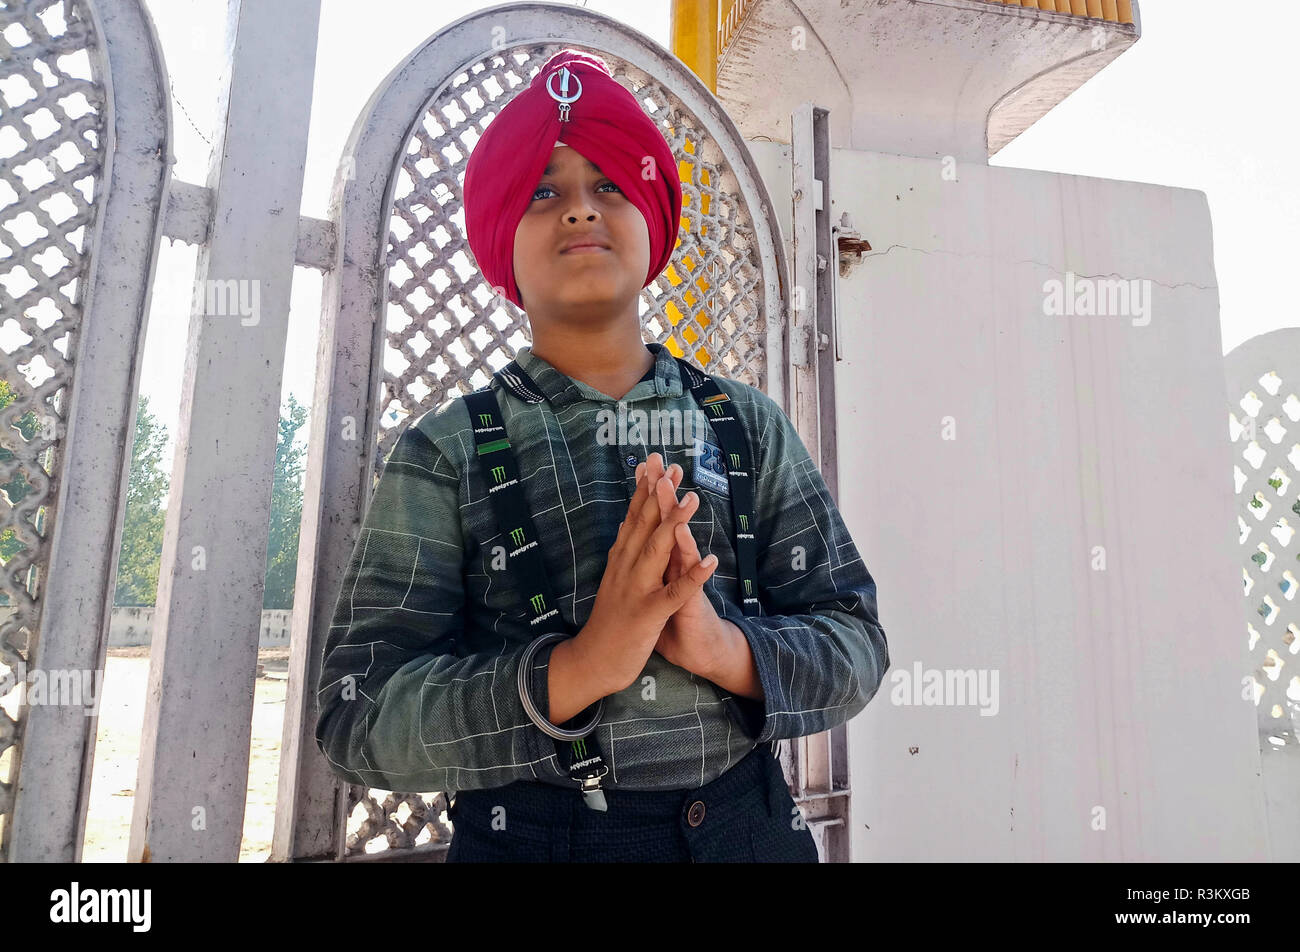 A Sikh devotee seen praying outside Gurdwara or a Sikh temple during the occasion of the 550th birth anniversary of Guru Nanak Dev, in Mohali. Sikhism was founded in the 15th century by Guru Nanak, who broke away from Hinduism, India’s dominant religion, He preached the equality of races and genders and the rejection of image-worship and the caste system. Stock Photo